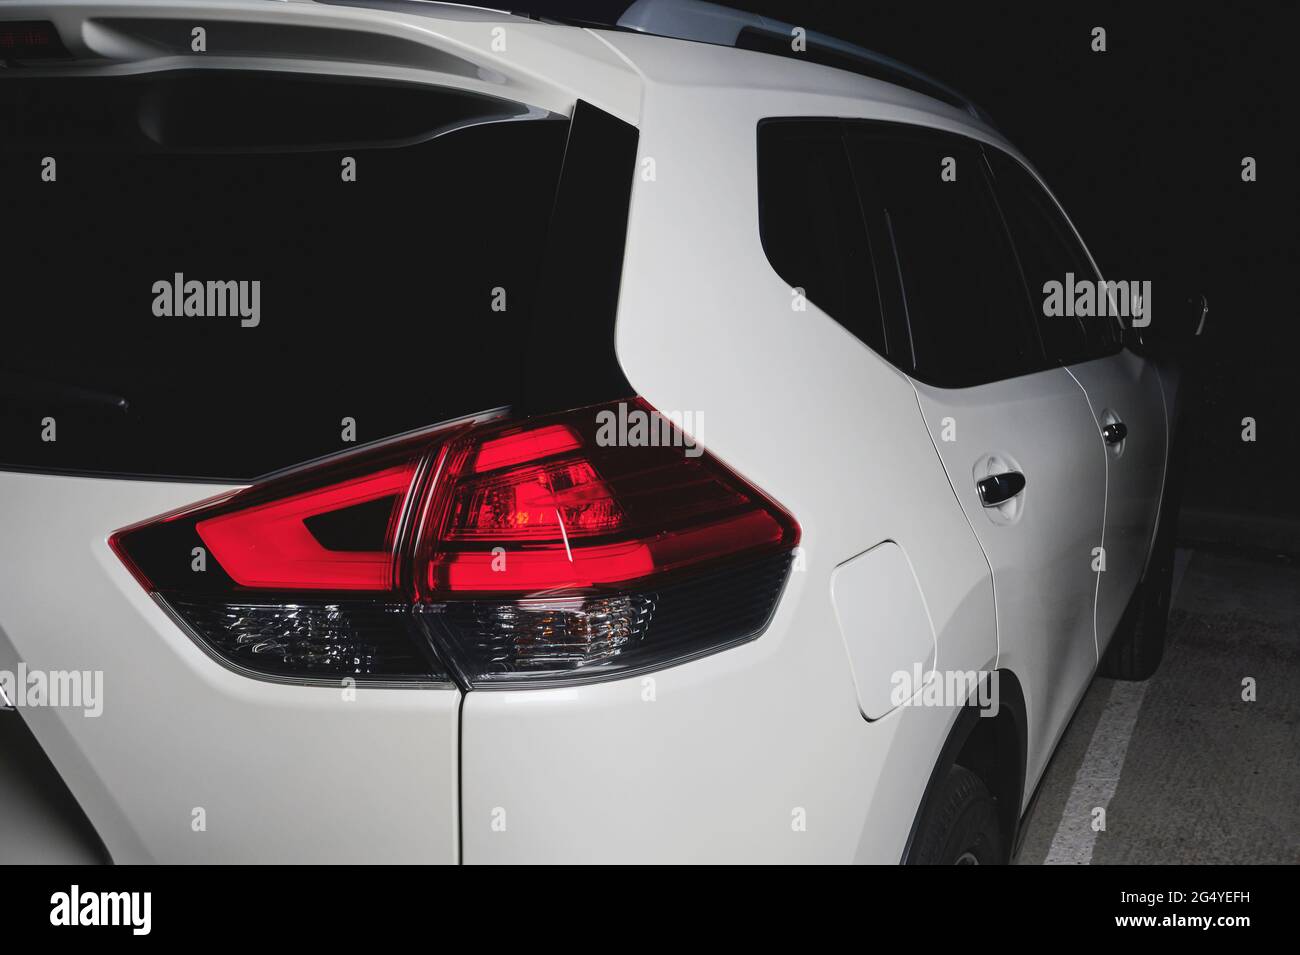 Back of white suv car with red rear lights close up view Stock Photo